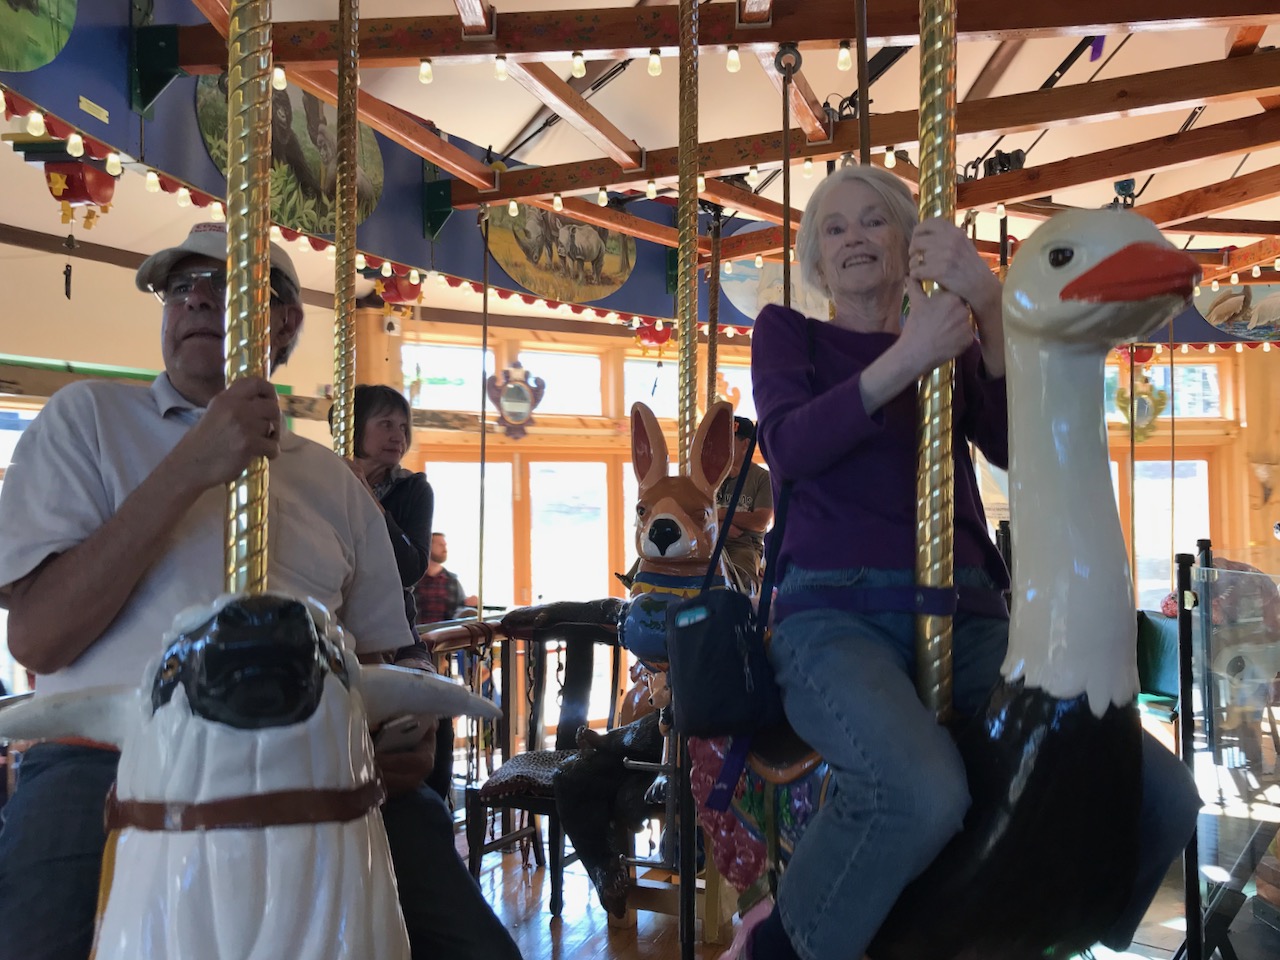 The Carousel of Happiness